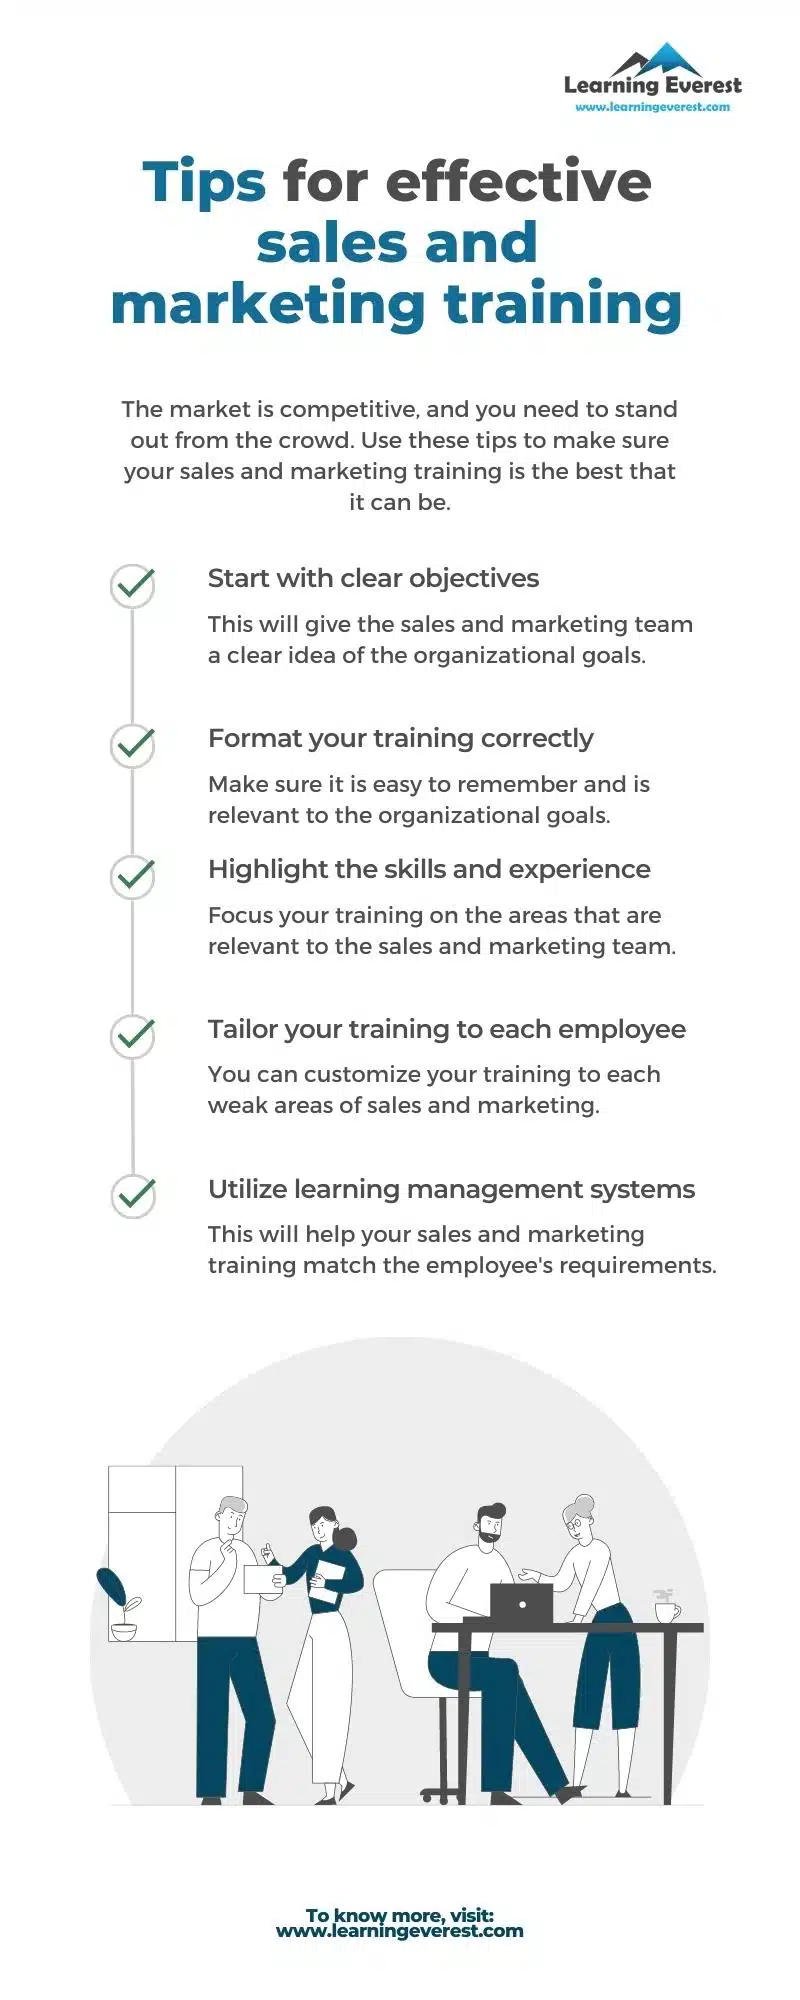 Tips for effective sales and marketing training